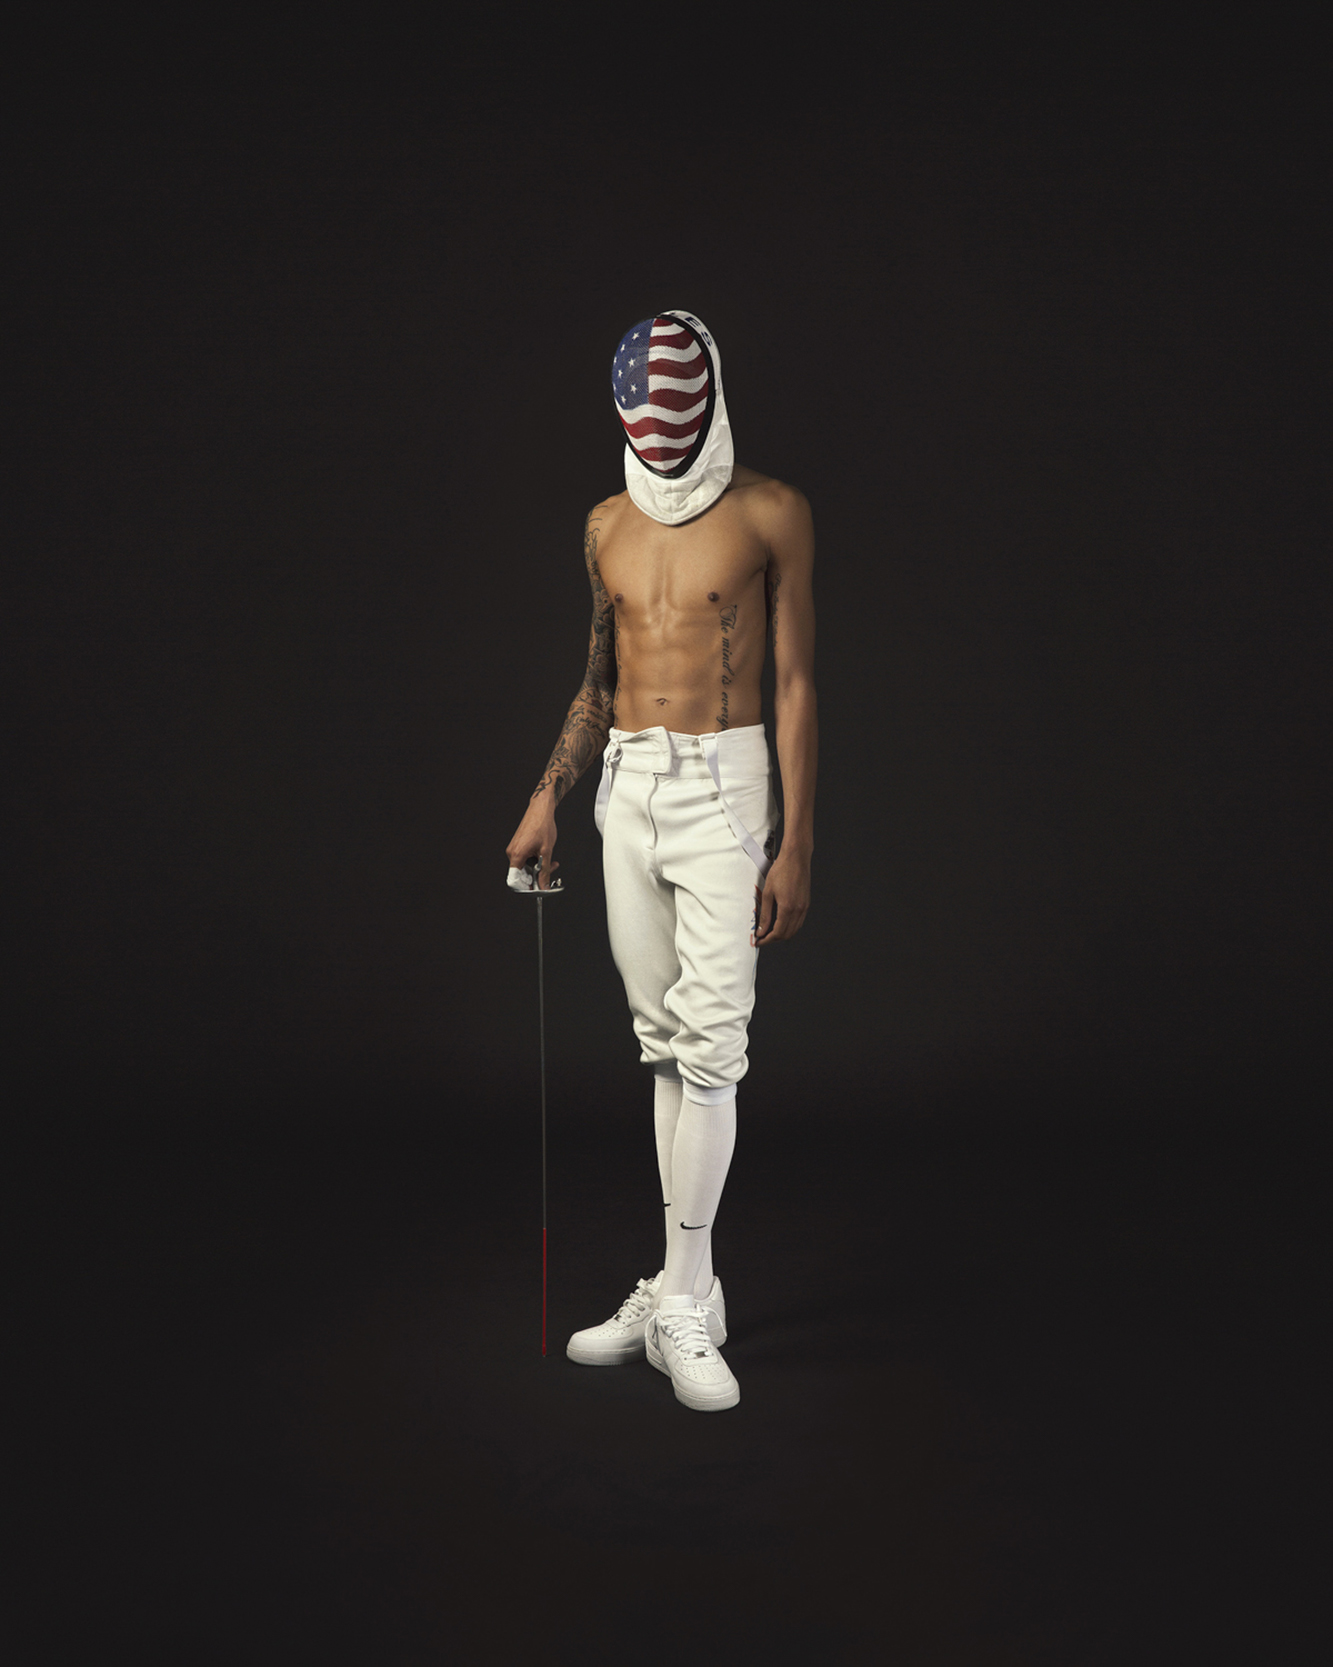 Miles Chamley-Watson ; Fencing Olympian photographed by Aviva Klein - copyright 2021